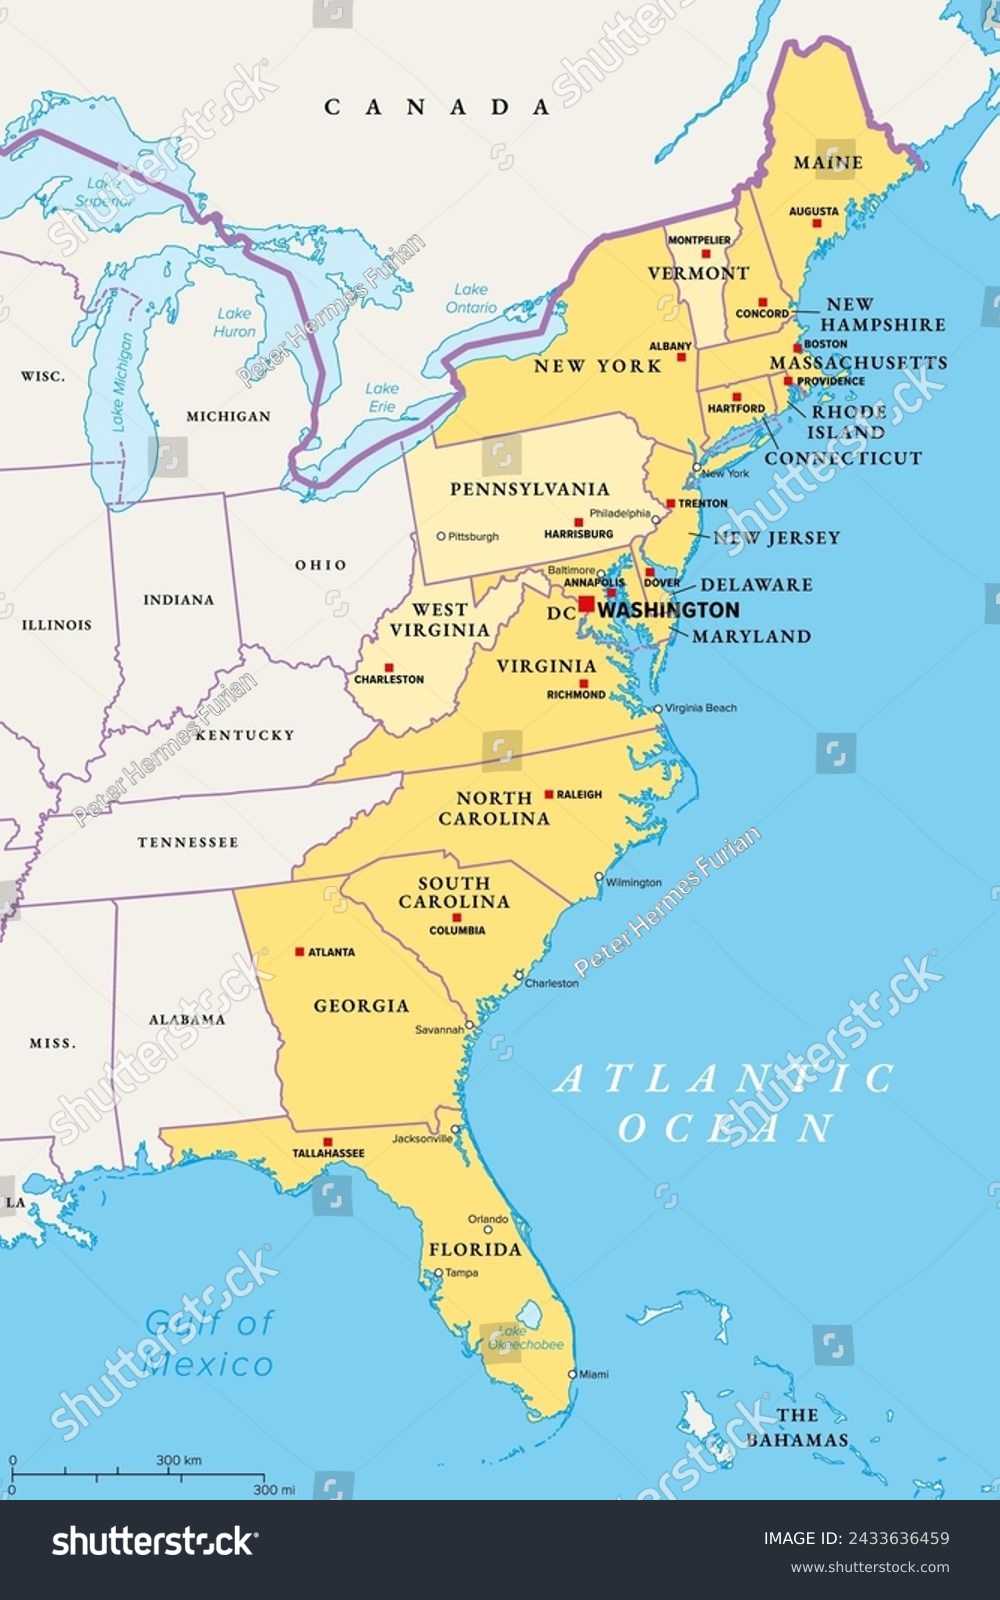 SVG of East or Atlantic Coast of the United States, political map. Eastern Seaboard states with coastline on Atlantic Ocean highlighted in yellow and States considered part of the East Coast in light yellow. svg